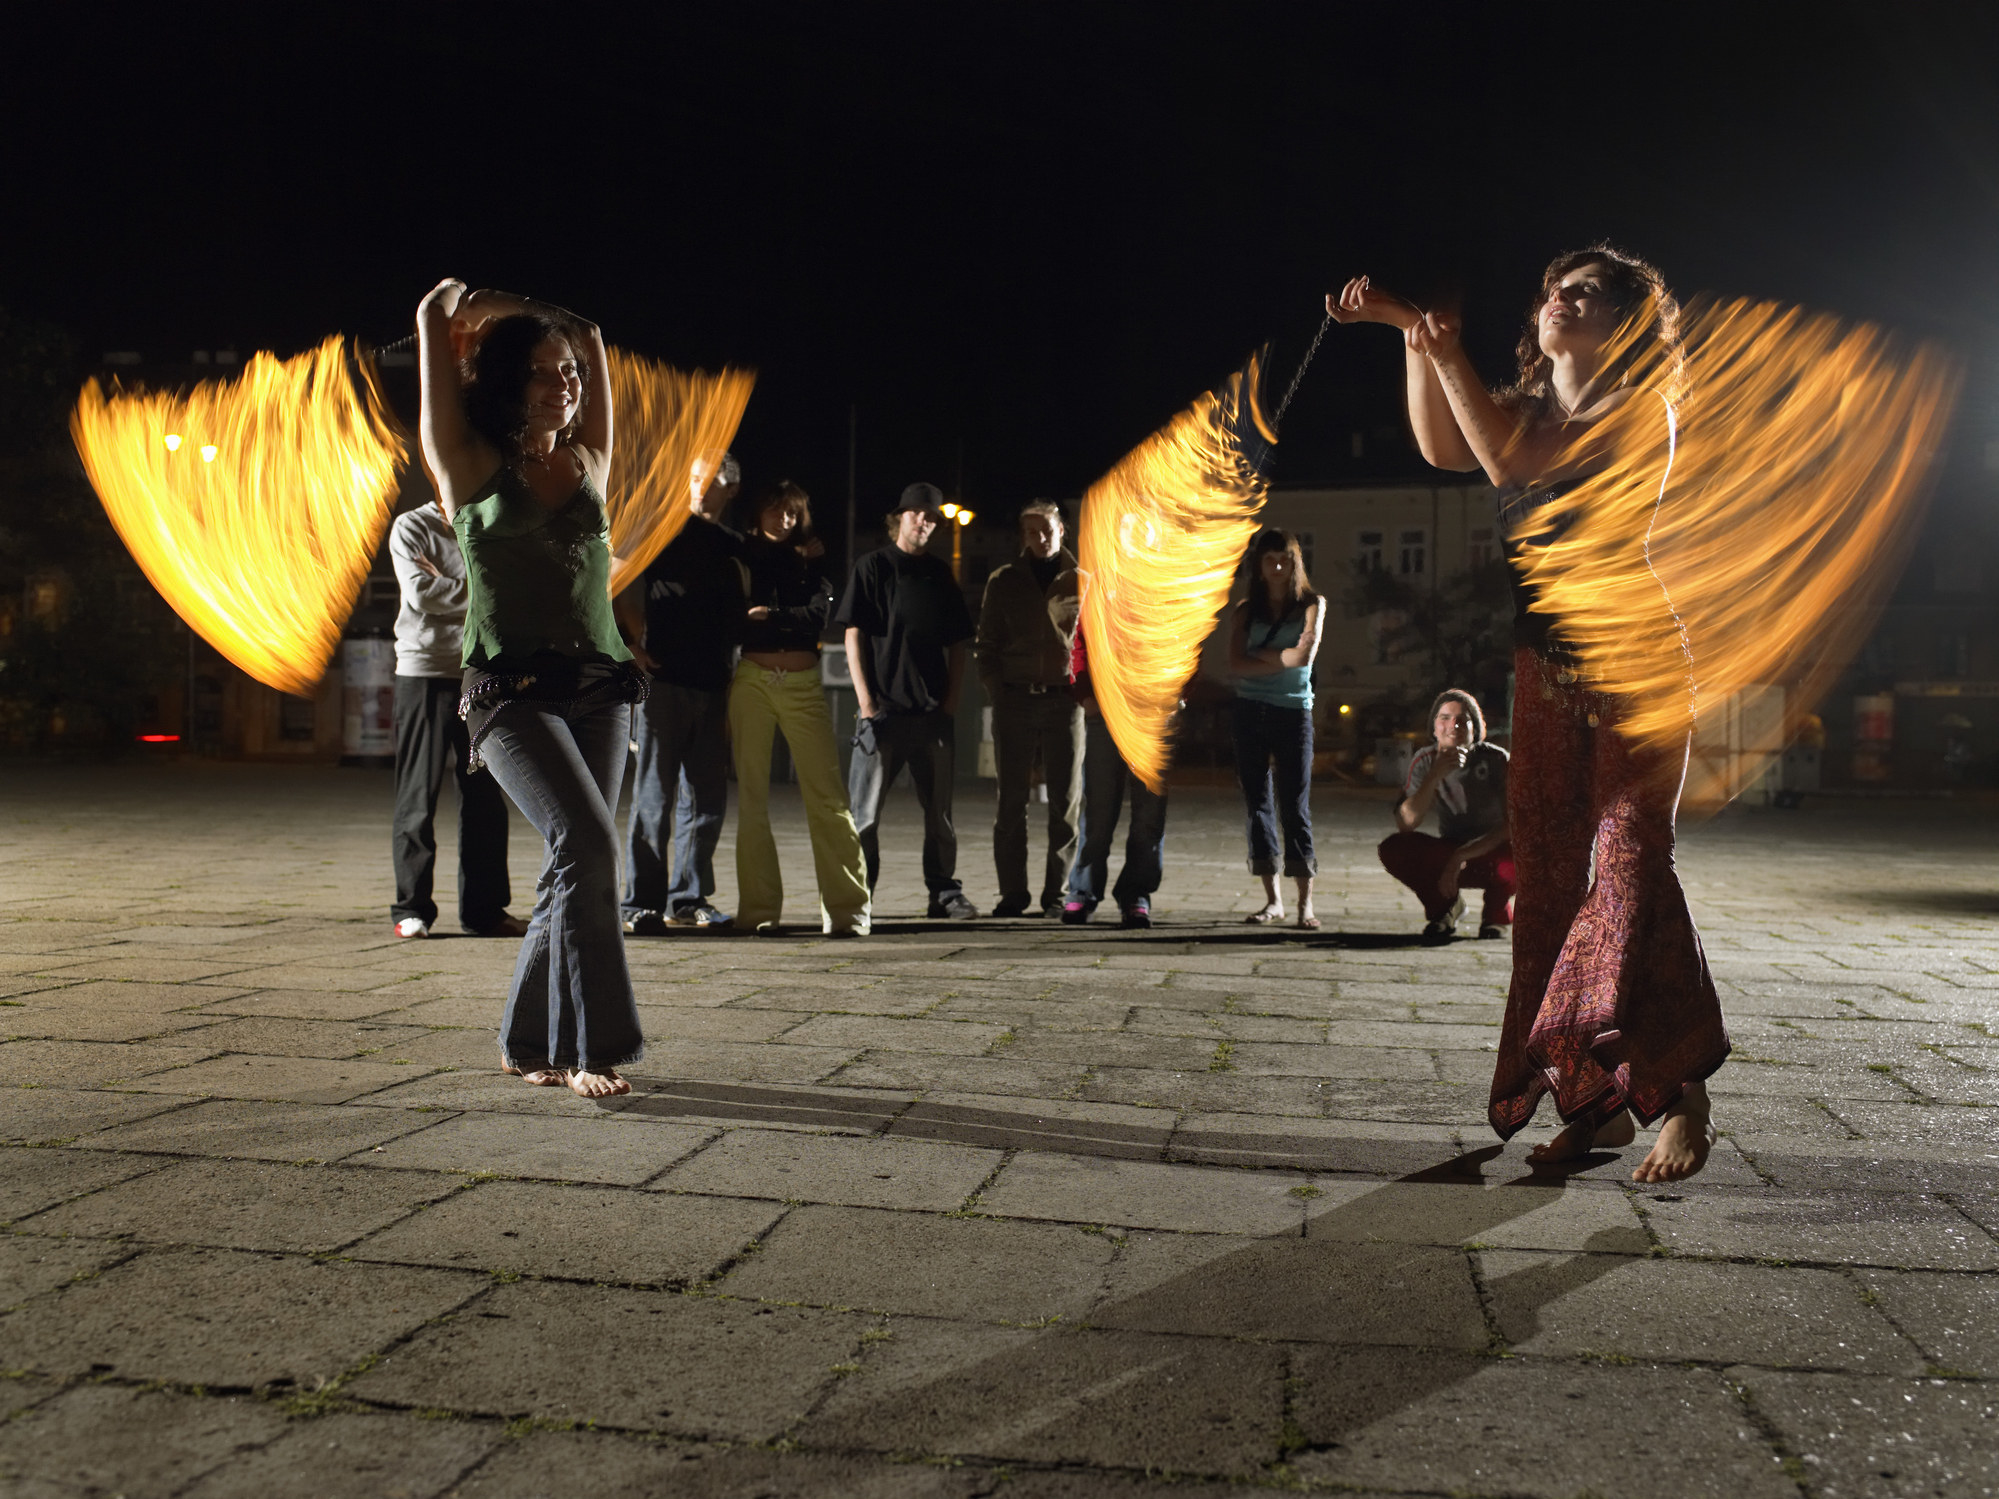 Women performing with fire batons on the street at night